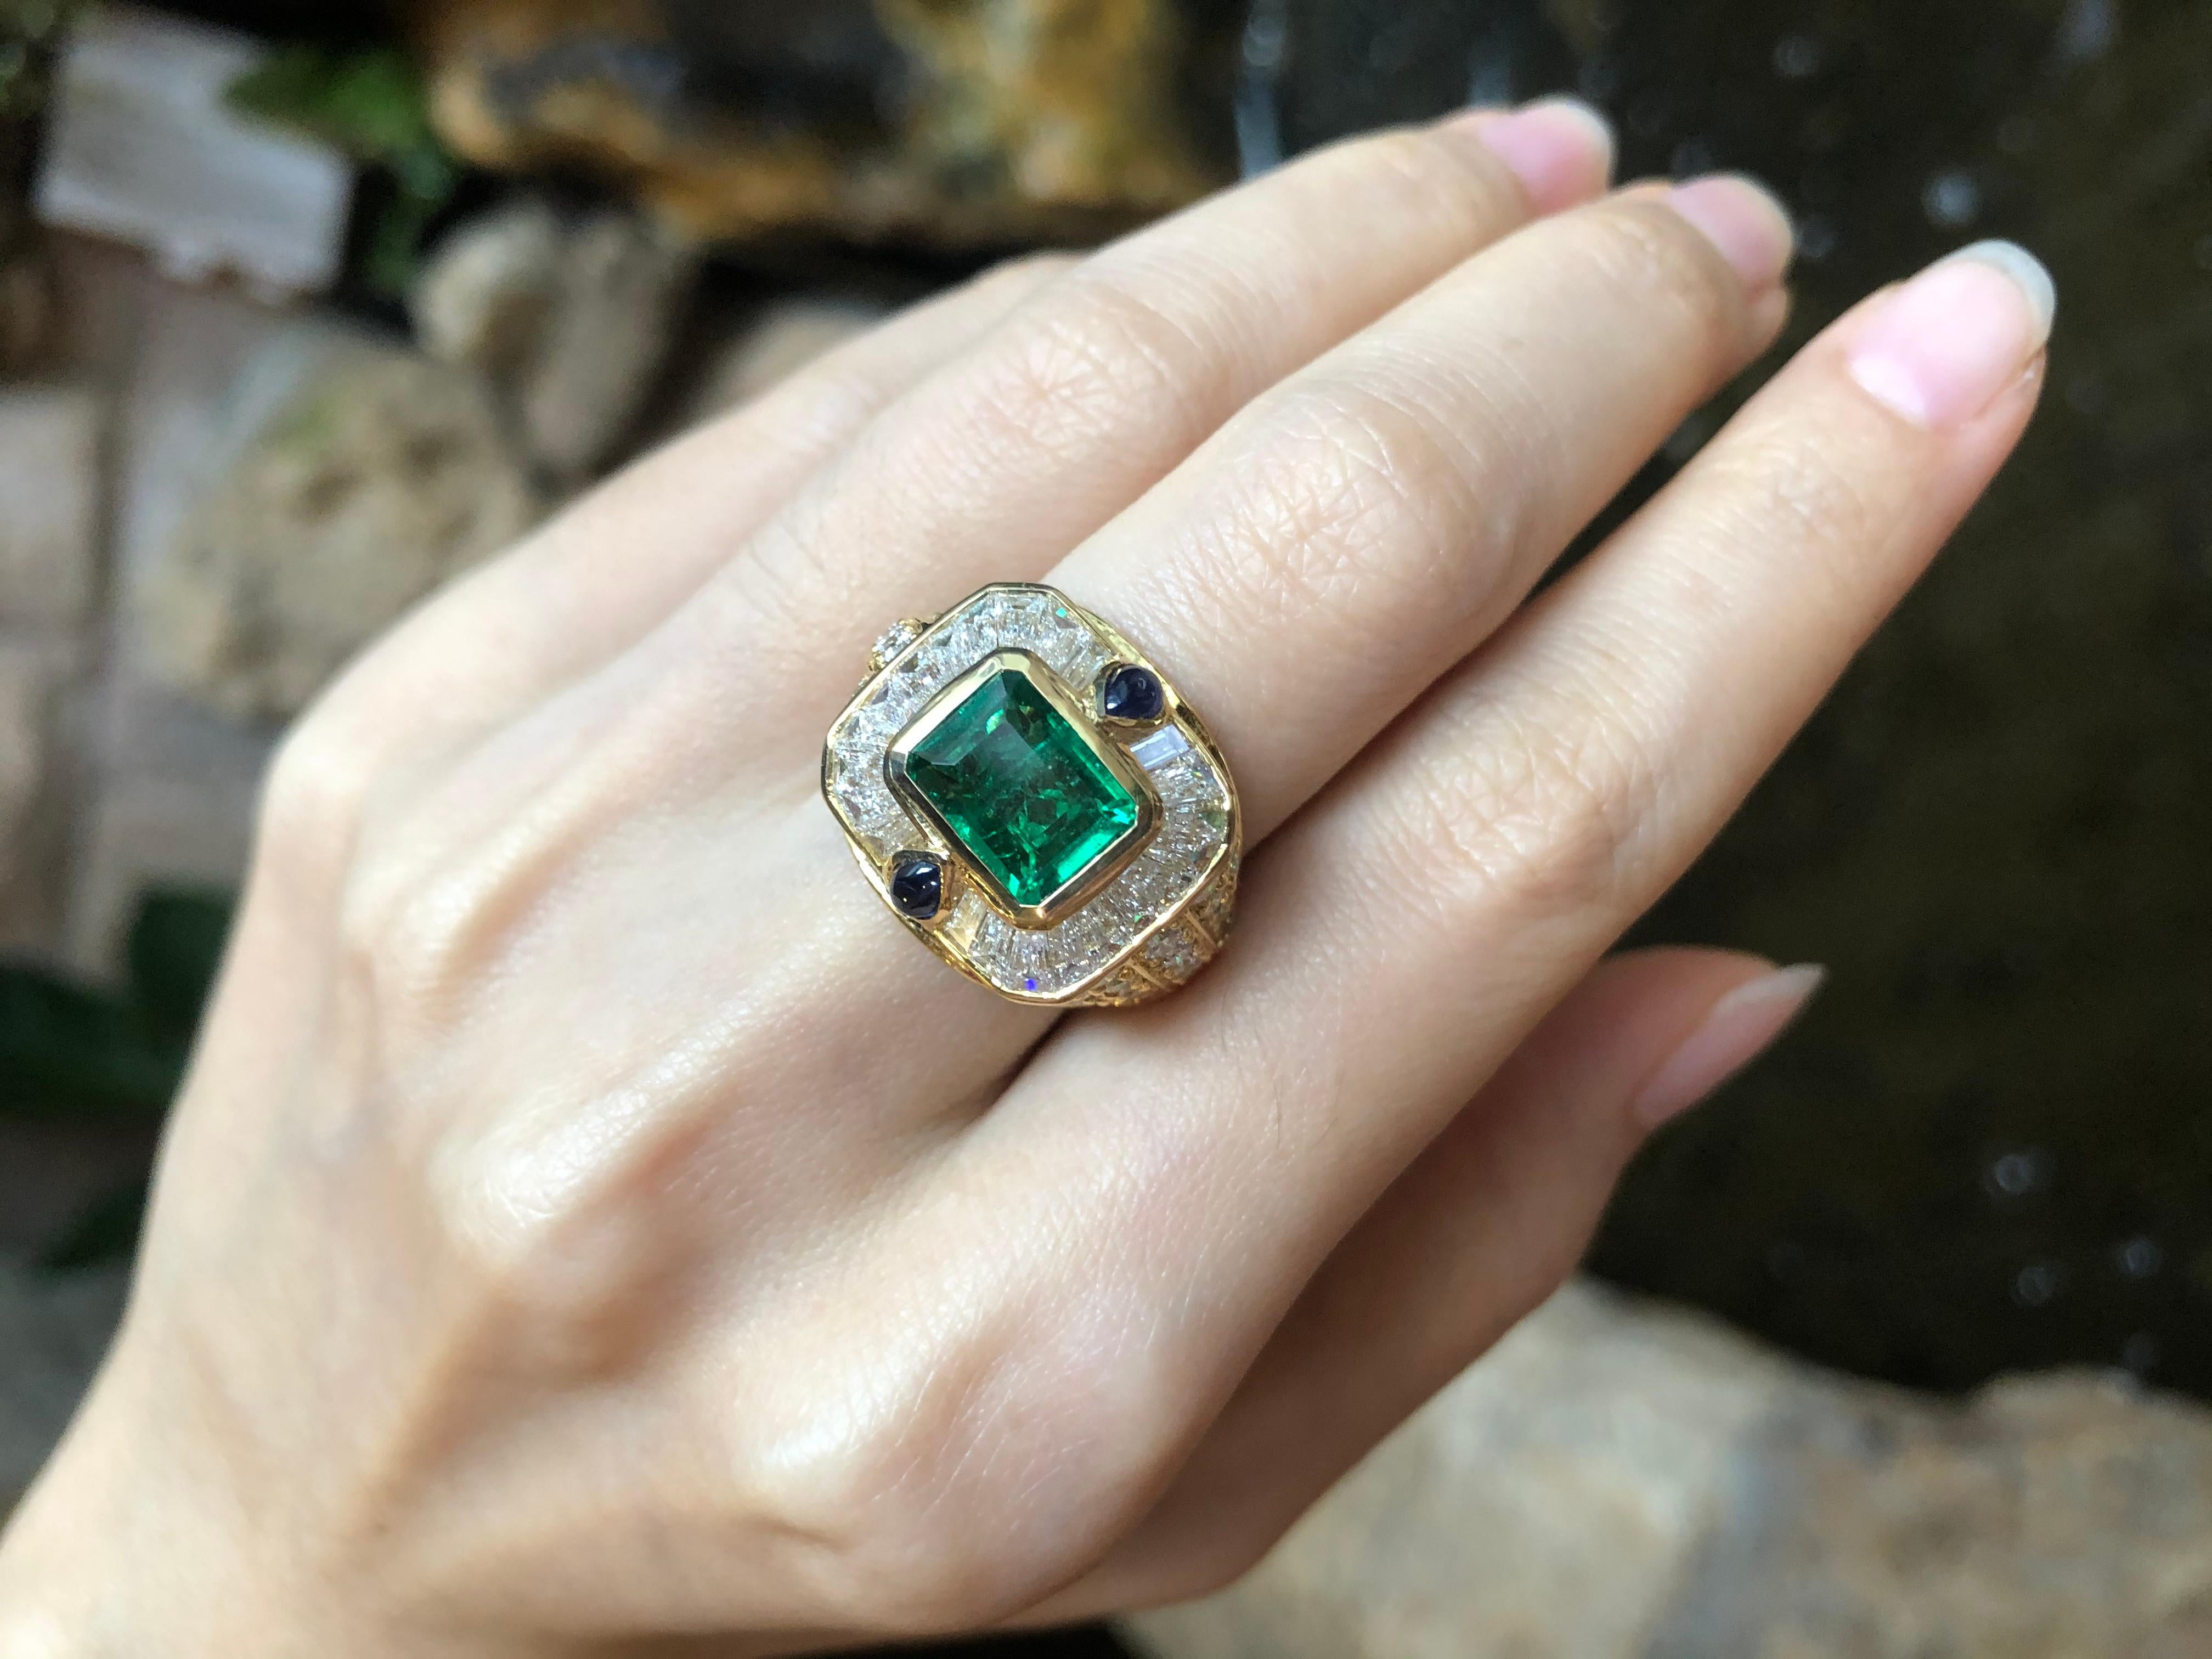 Emerald 2.62 carats with Diamond 5.10 carats and Cabochon Blue Sapphire 0.47 carat Ring set in 18 Karat Gold Settings

Width:  1.0 cm 
Length: 0.8 cm
Ring Size: 54
Total Weight: 13.68 grams

